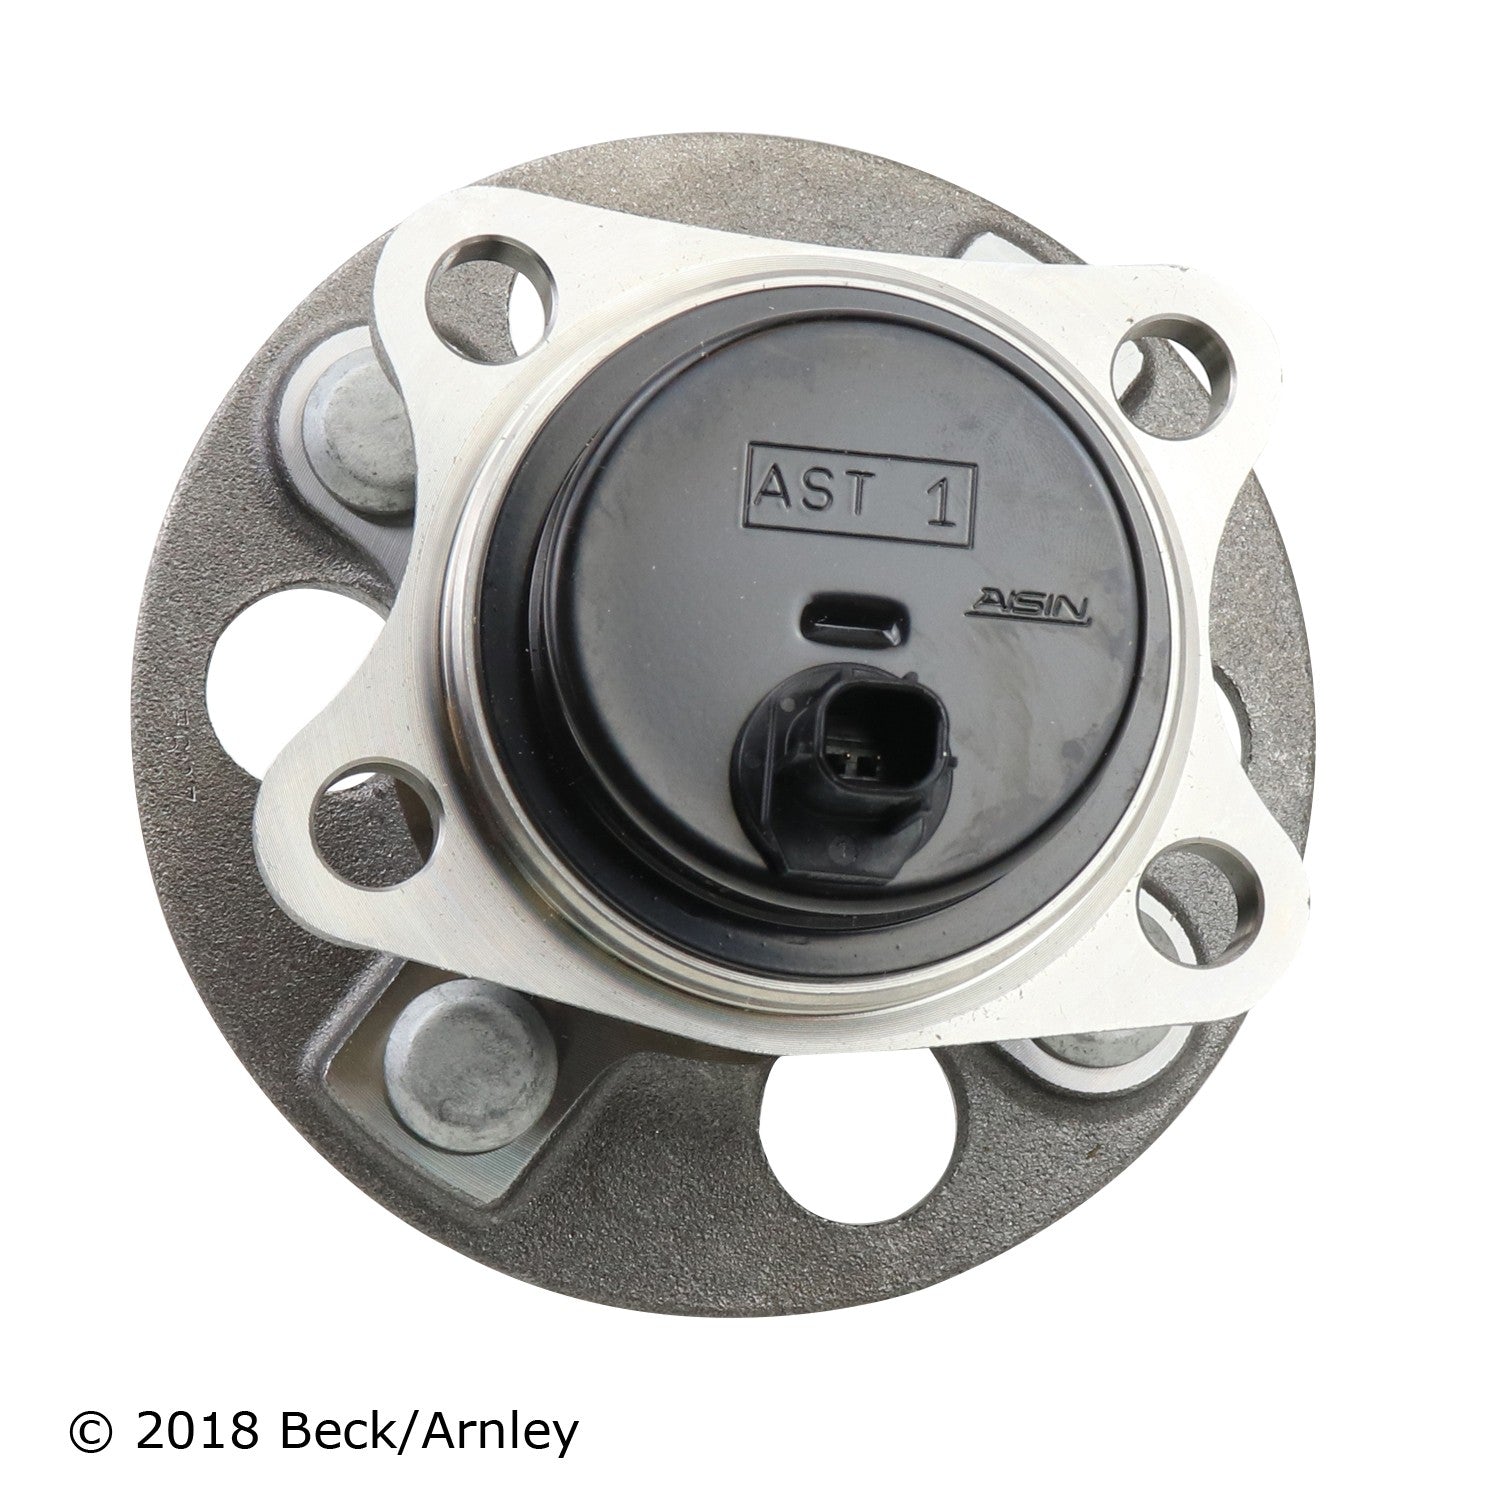 Beck Arnley 051-6272 Rear Wheel Bearing and Hub Assembly for Scion iQ Toyota Prius C Yaris FWD